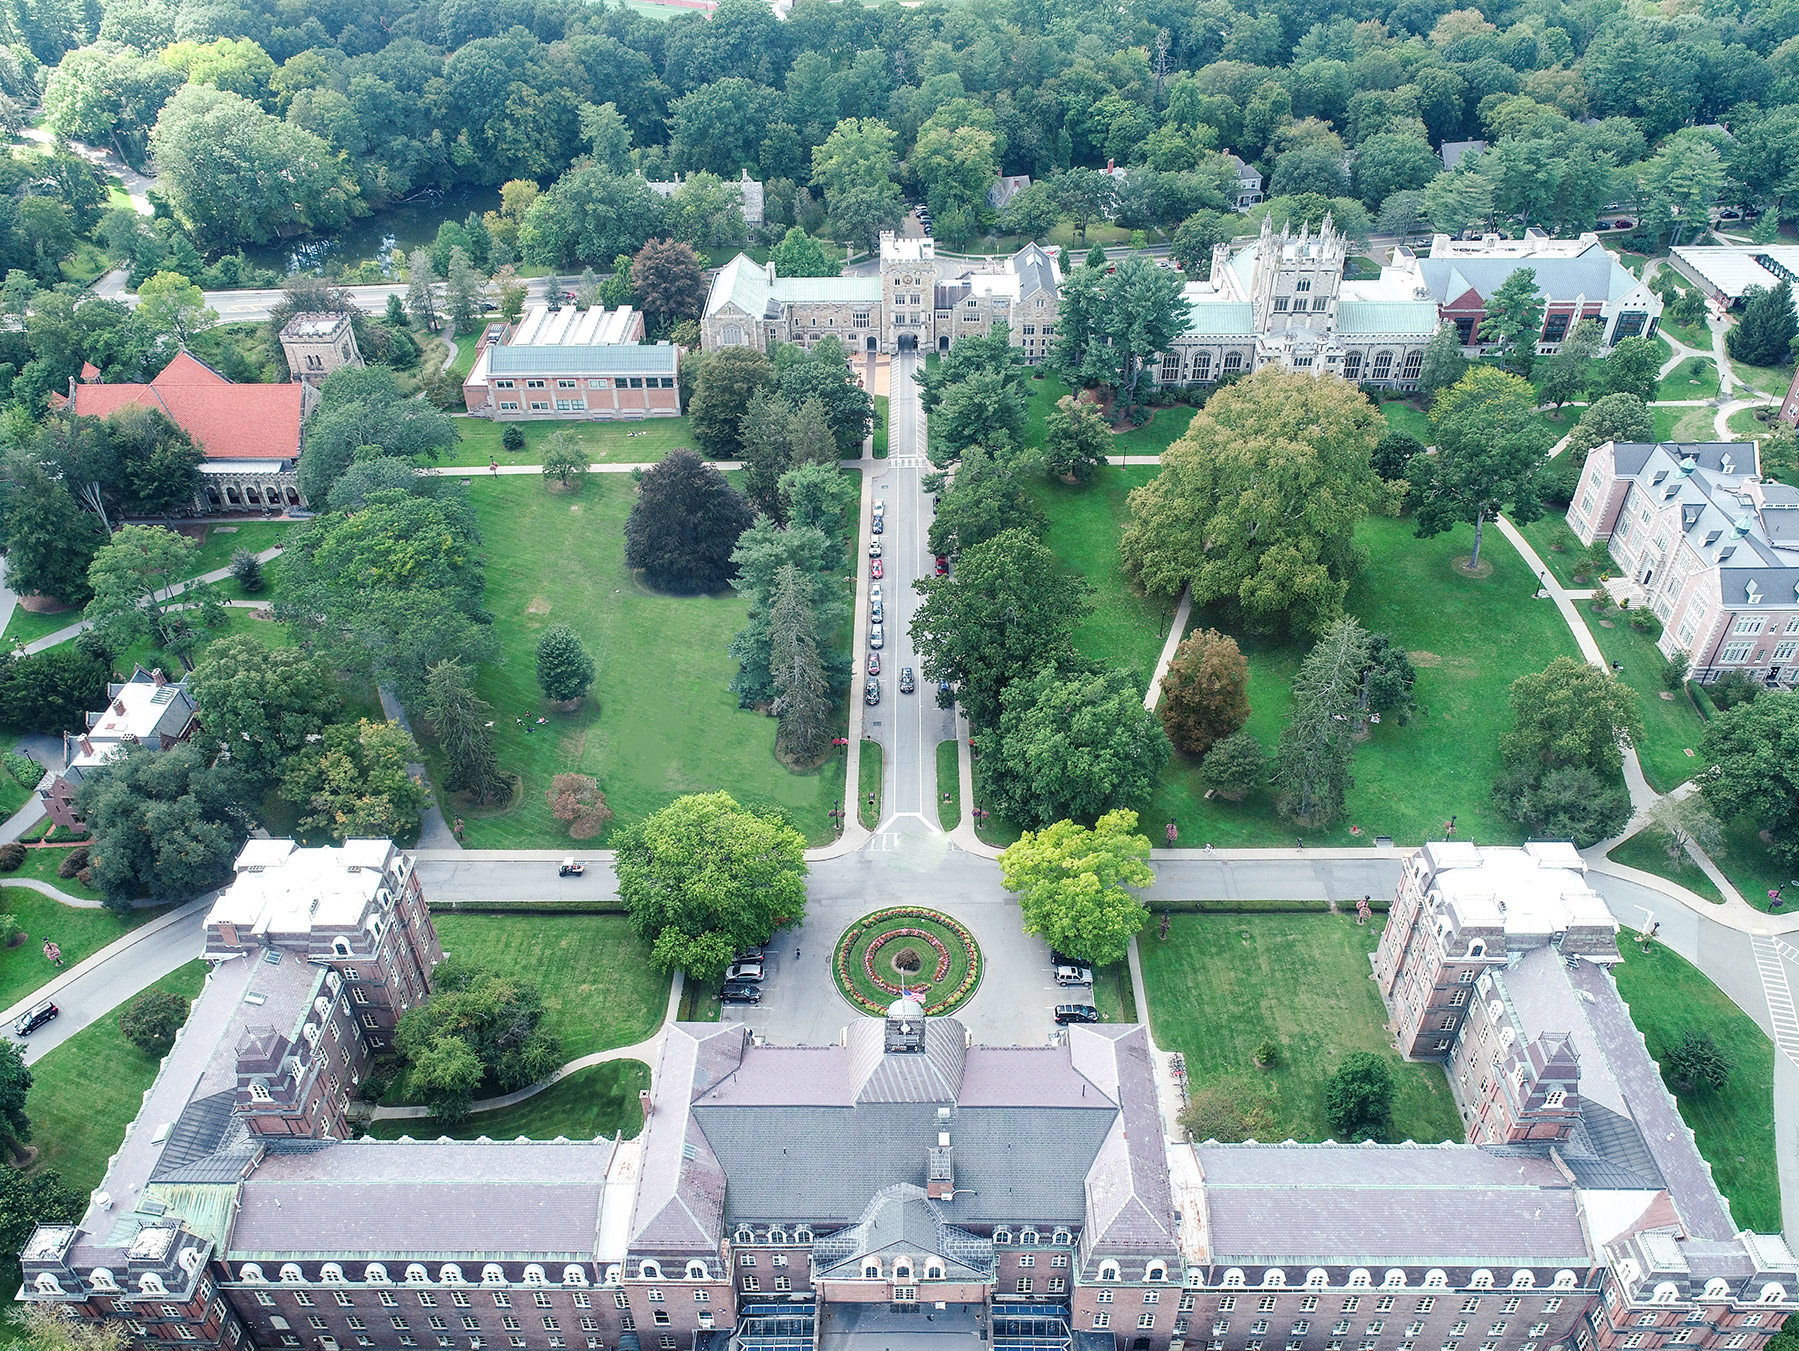 J. C. Olmsted’s central green, seen from over Main Building looking west, and framed by “working buildings”, as he recommended. (Photo: Chad Fust, September, 2021)